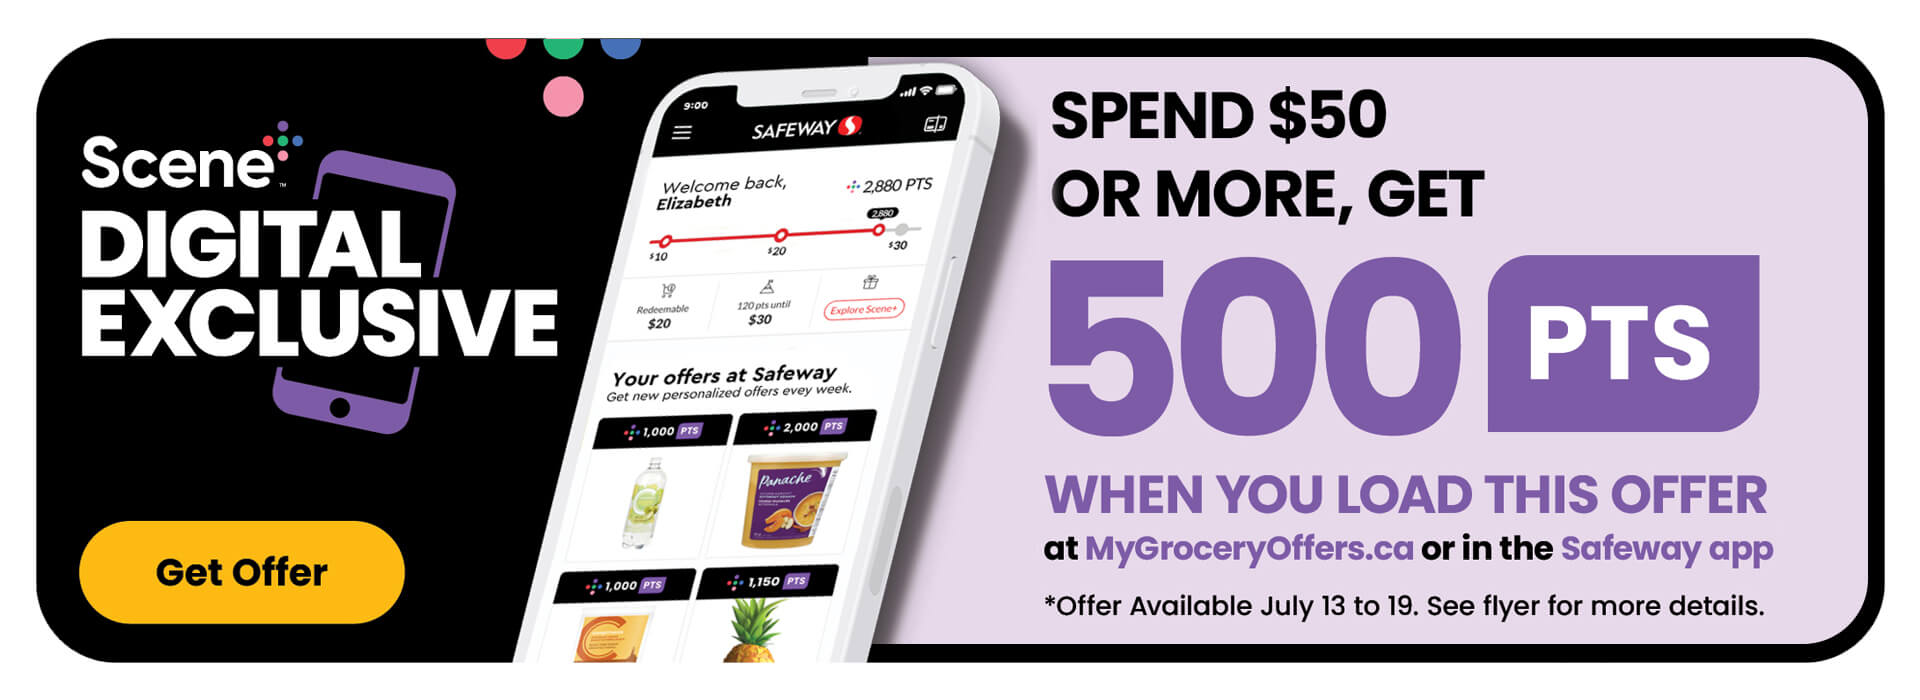 Scene+ Digital Exclusive Offer. Spend $50 or more, get 500 PTS when you load this offer at mygroceryoffers.ca or in the Safeway App. Offer available to be loaded from July 13 to July 19. See flyer for more details.